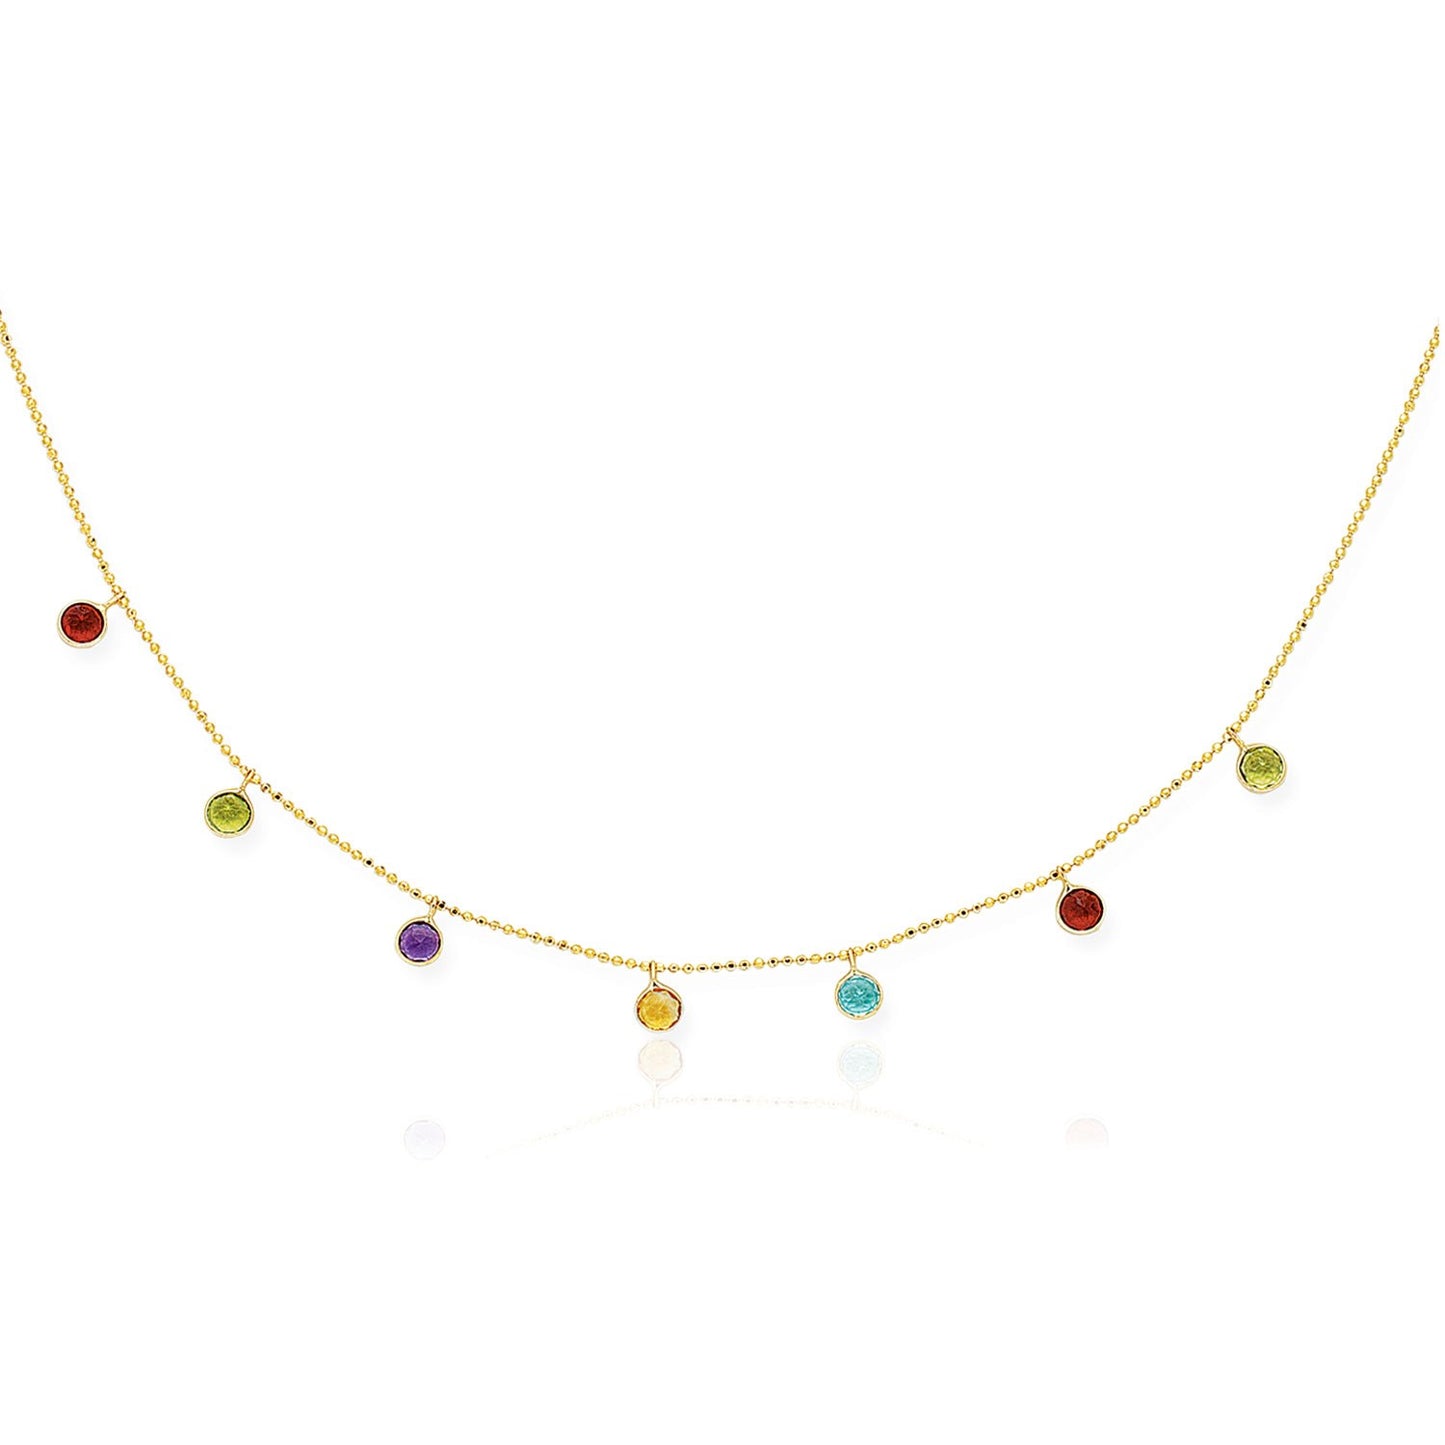 14k Yellow Gold Cable Chain Necklace with Round Multi-Tone Charms-0